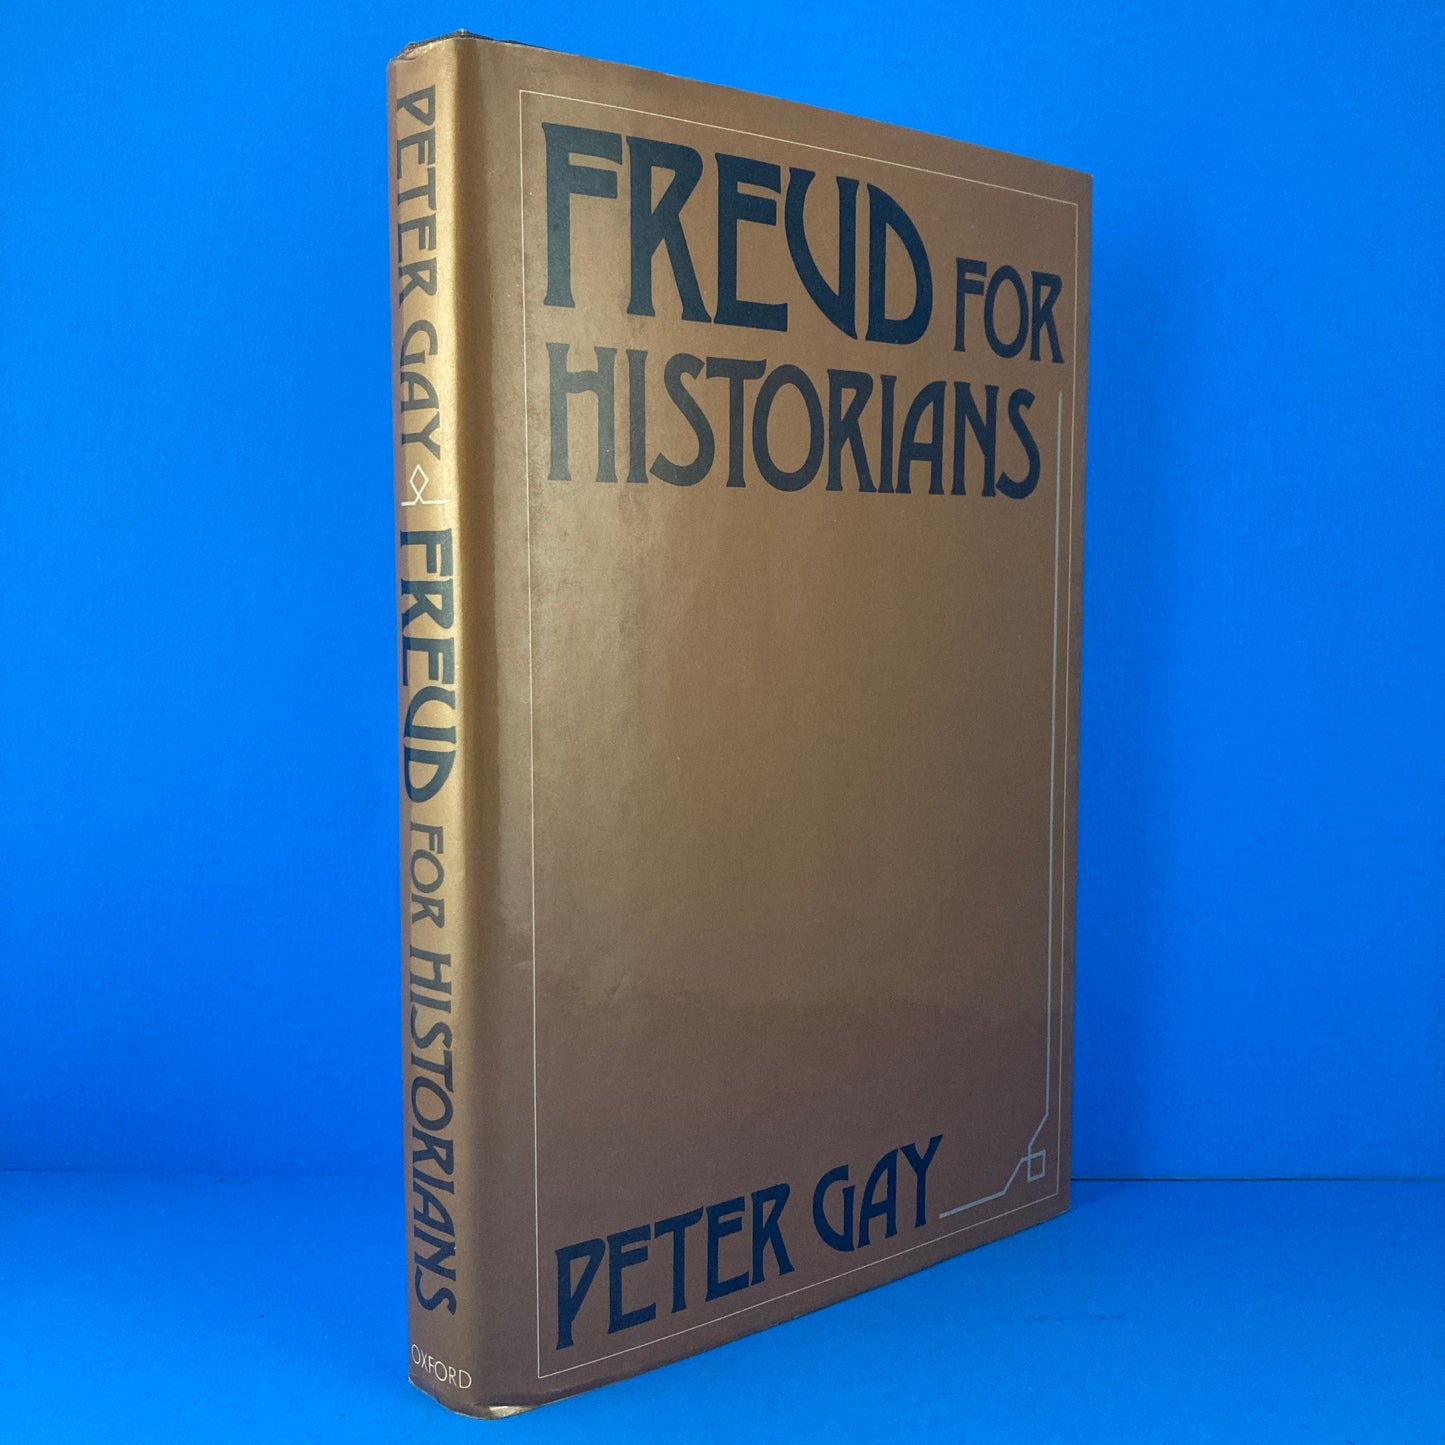 Freud for Historians